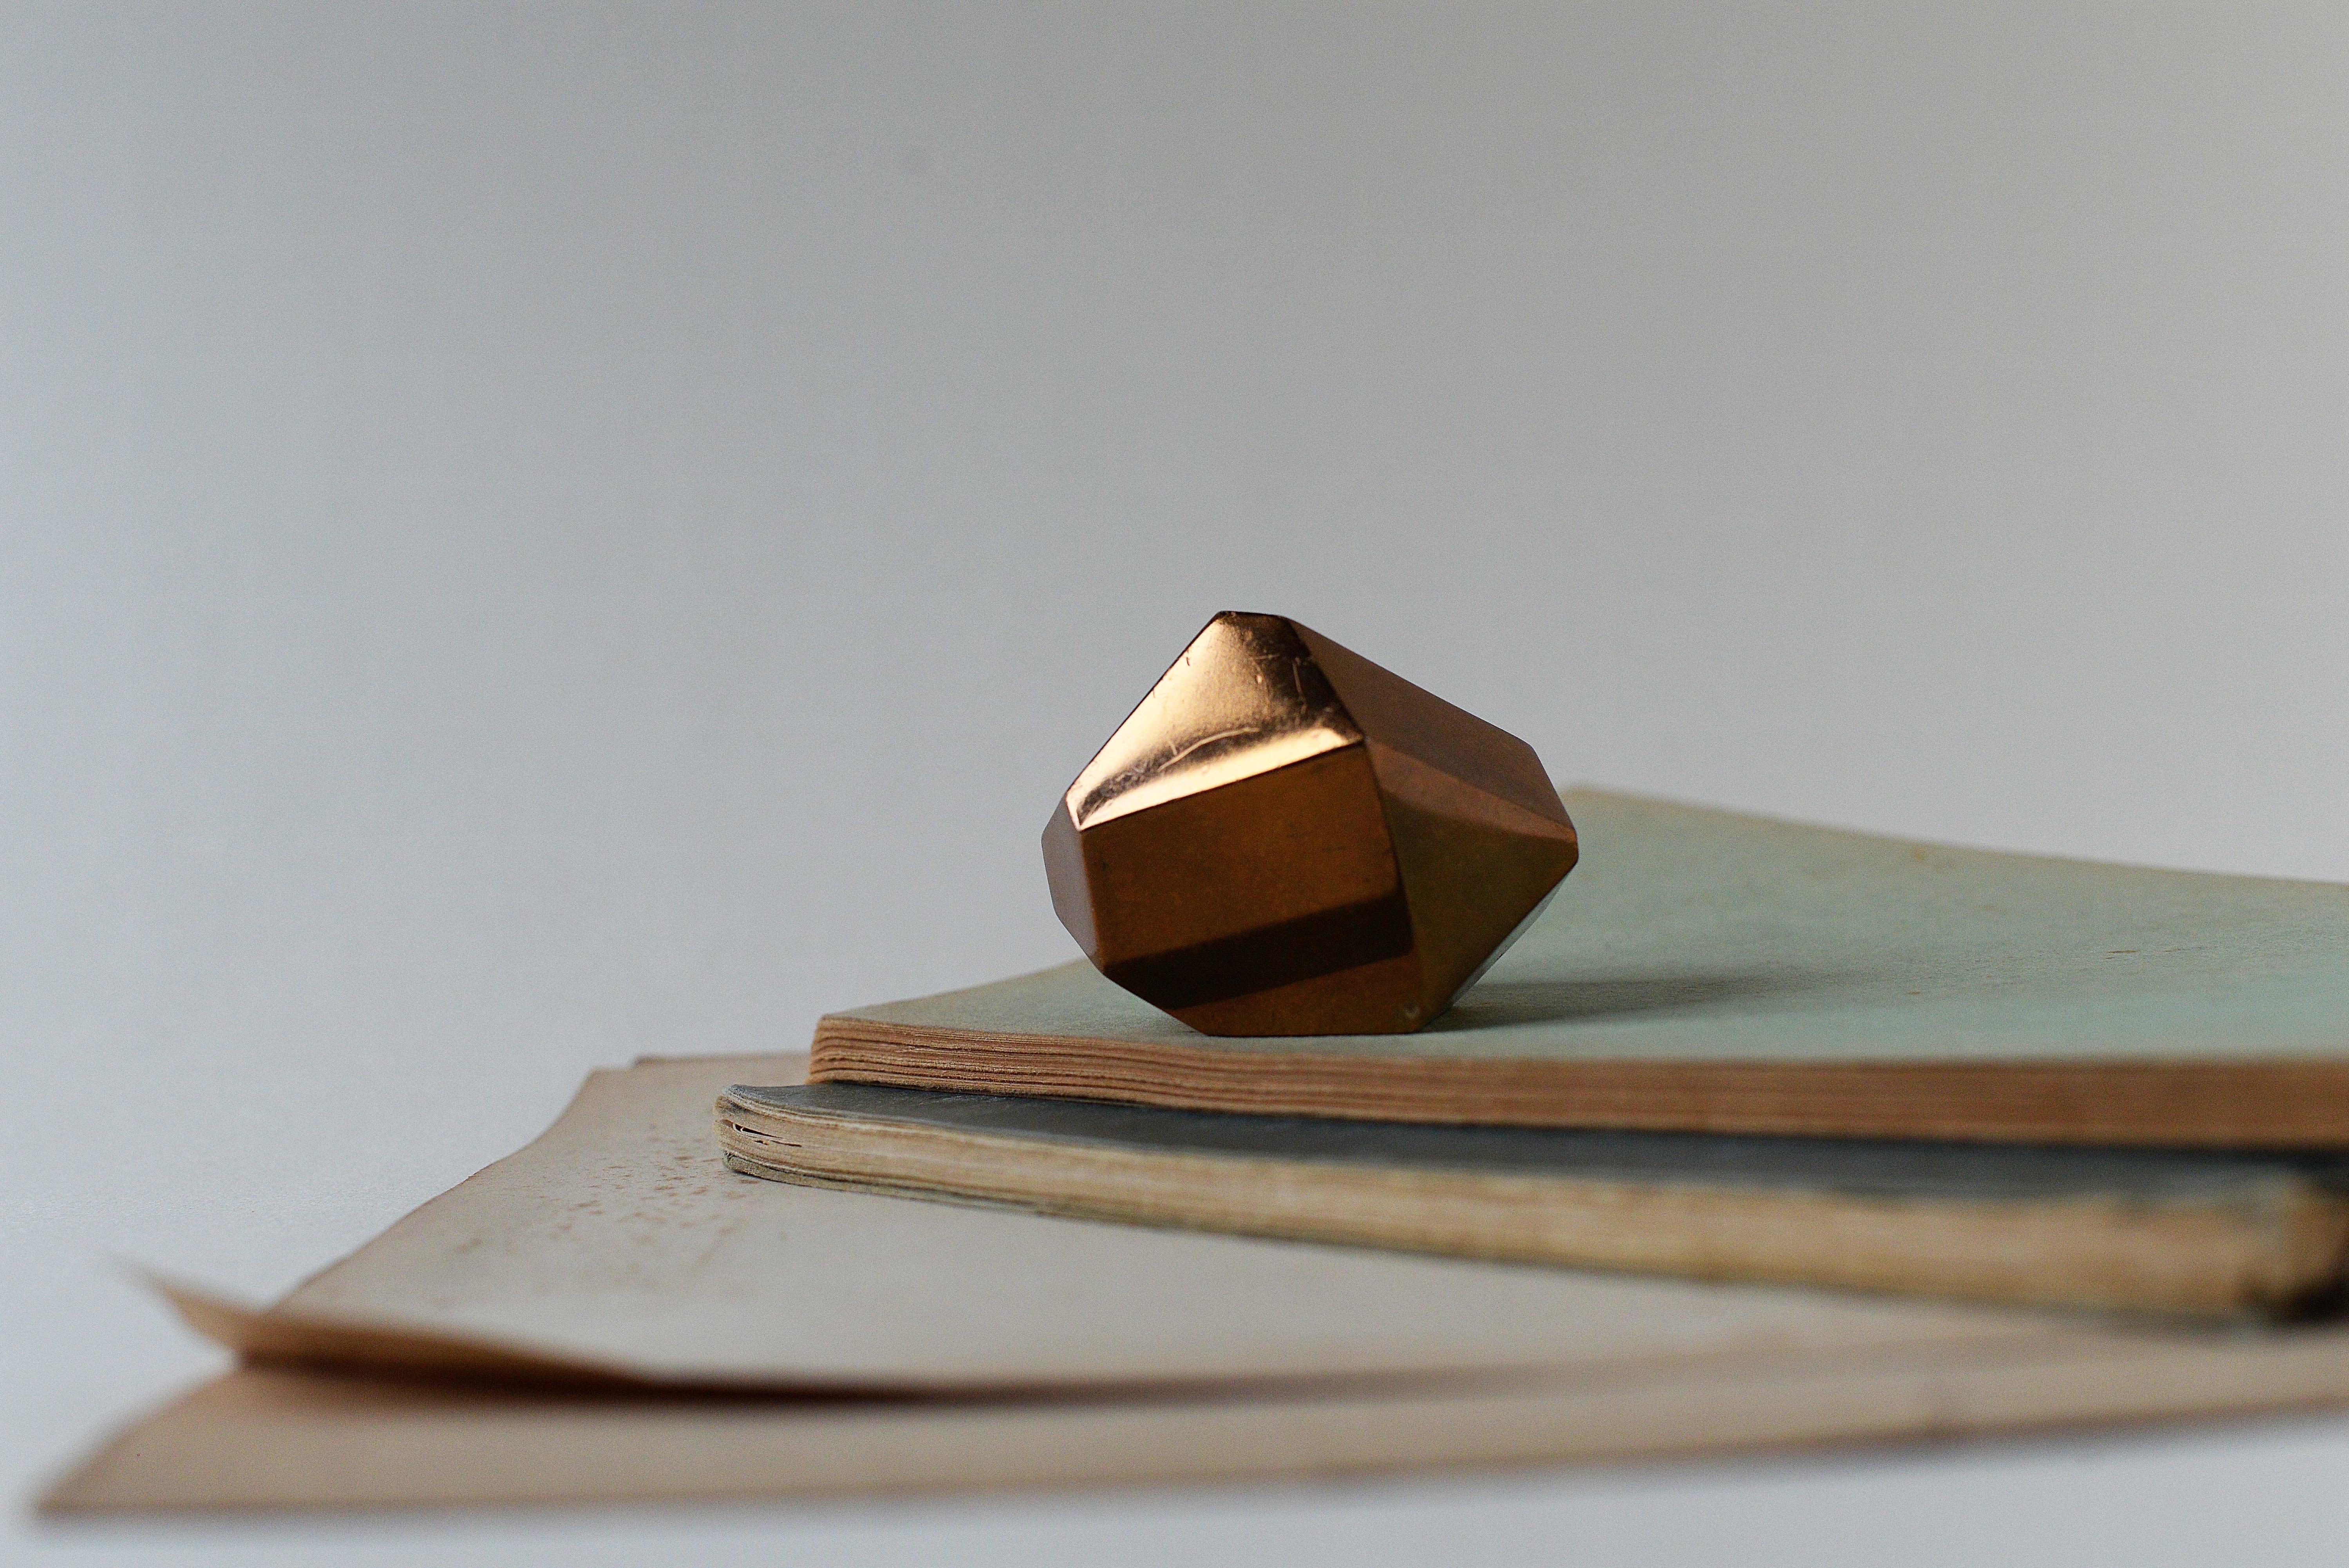 Bronze Geometric Paperweight, Brass-Plated, 1980s

This bronze paperweight looks like a gem, thanks to its graphic and geometric lines.

This piece was designed in 1987 for the 20th anniversary of the American oil company EXXON (and intended for the